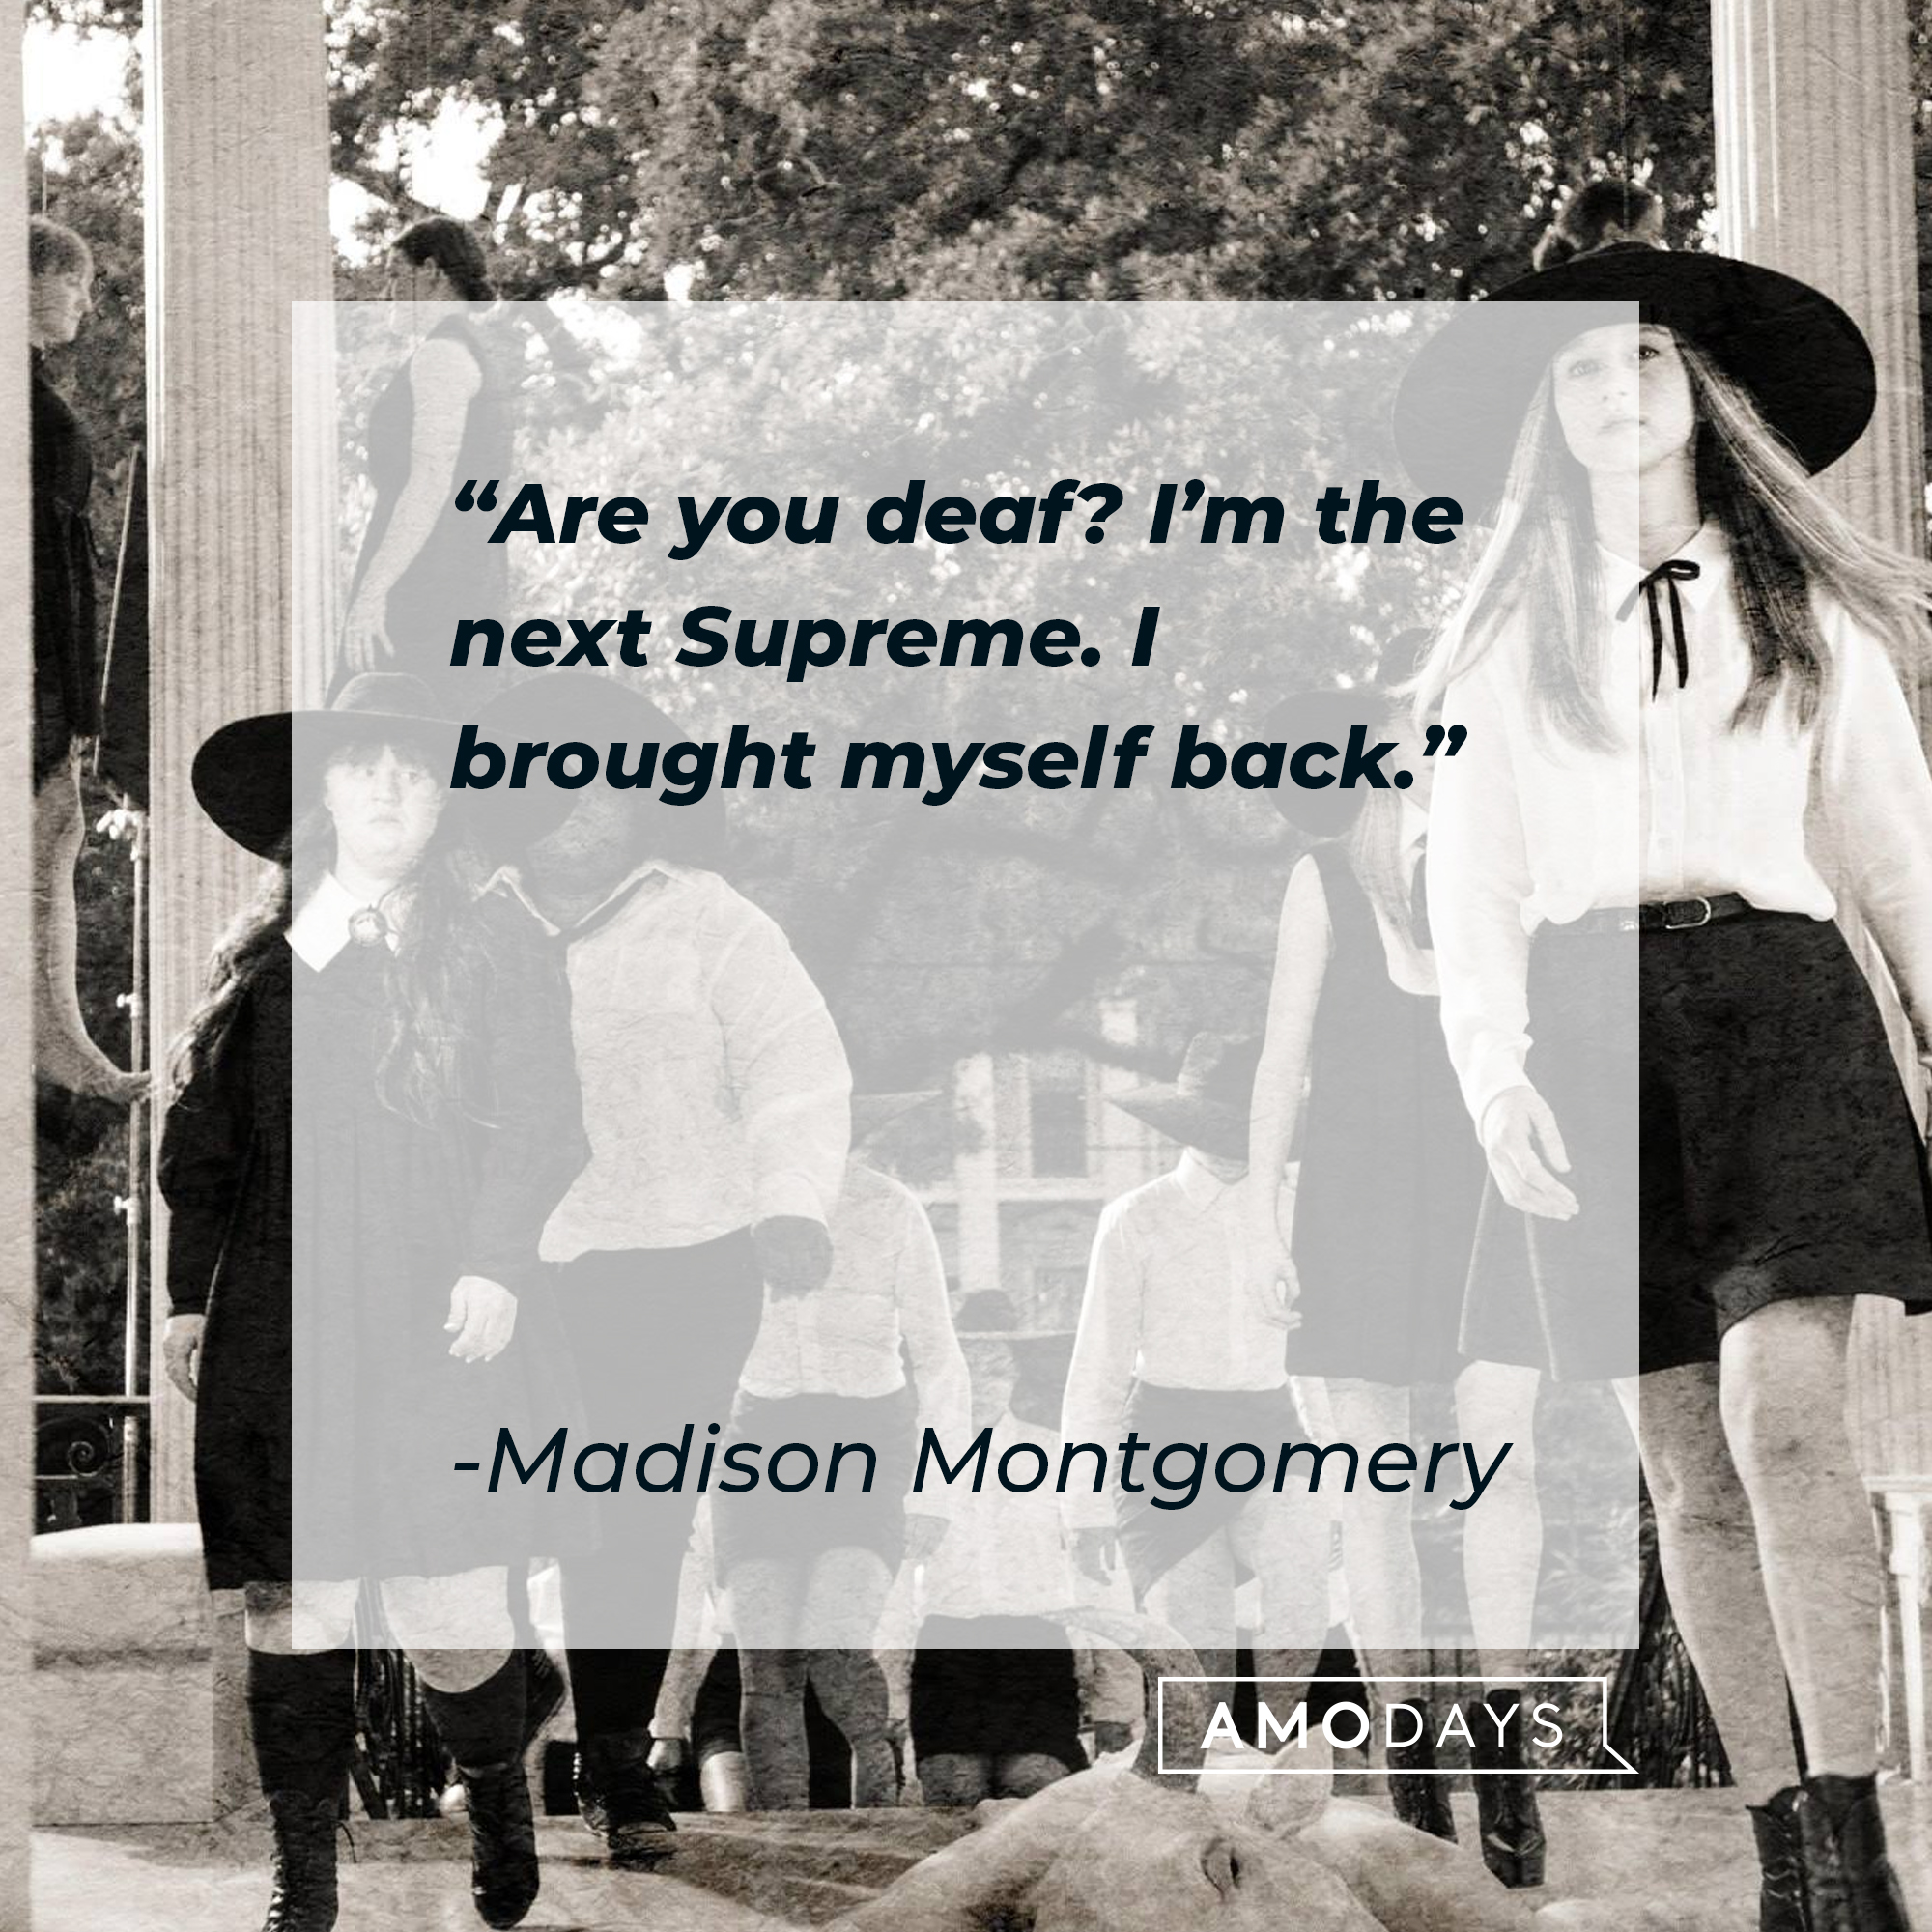 Madison's quote: “Are you deaf? I’m the next Supreme. I brought myself back.” | Source: facebook.com/americanhorrorstory